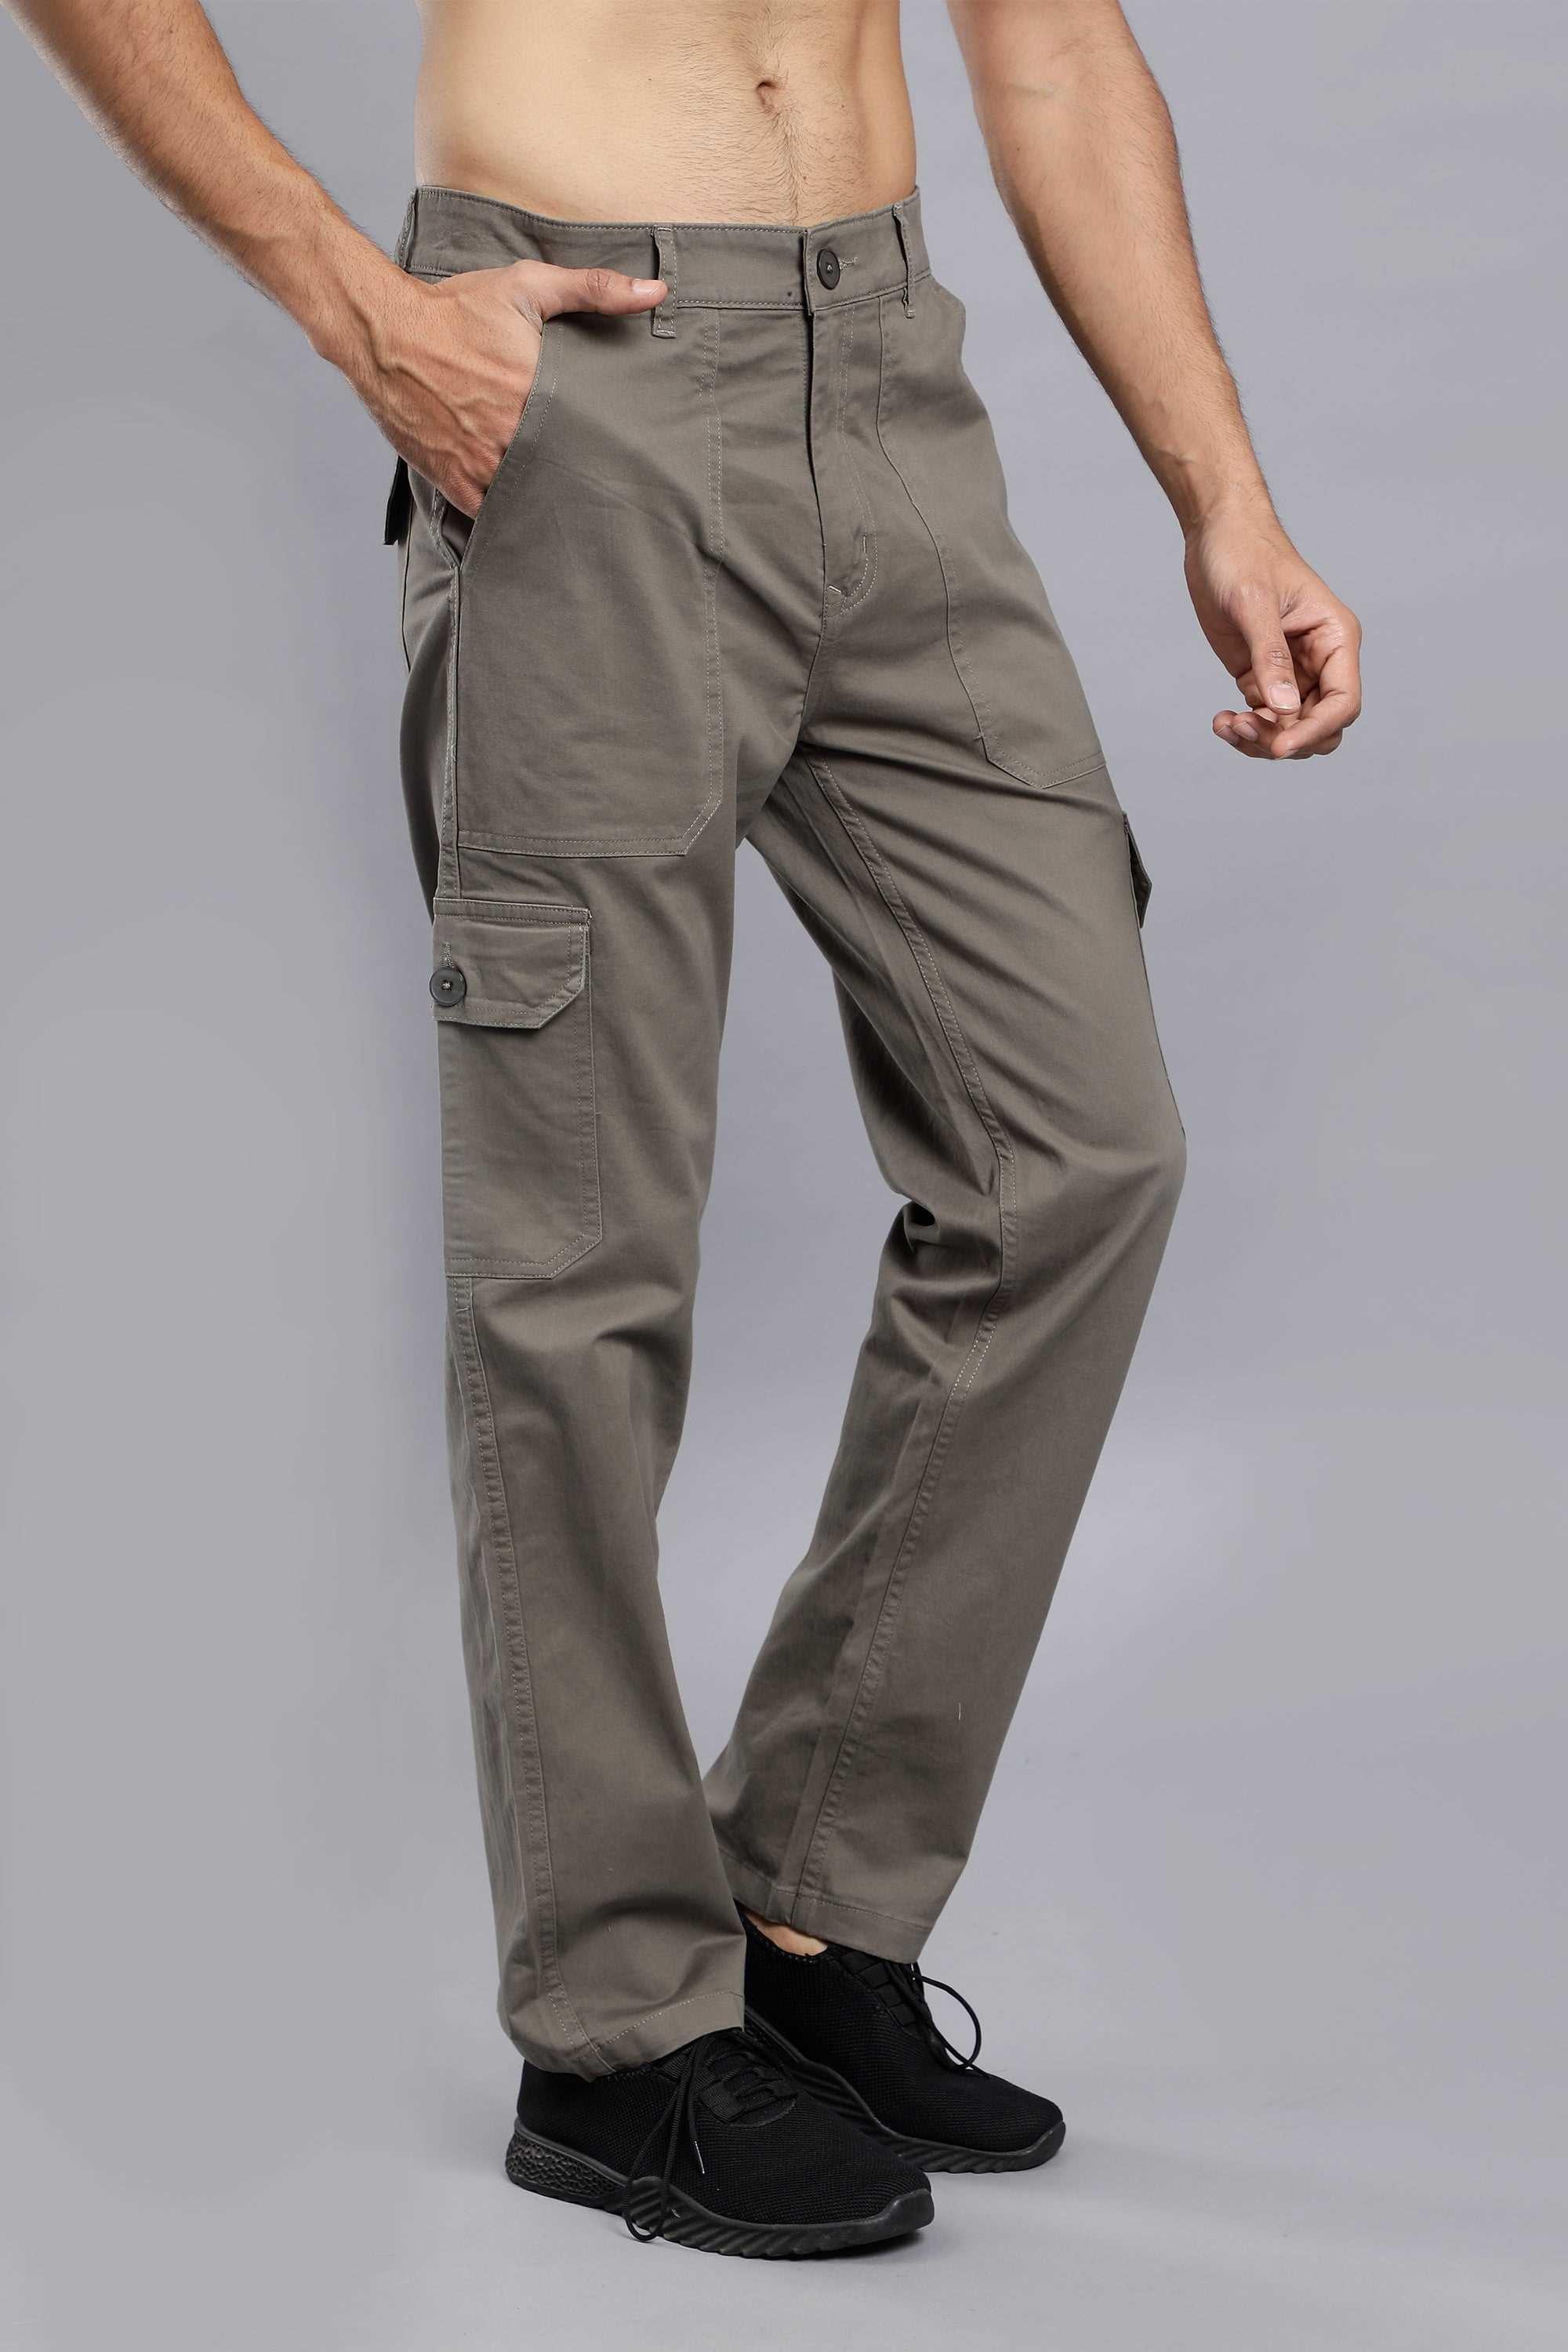 C.P. Company - STRETCH SATEEN LOOSE FIT CARGO PANTS | HBX - Globally  Curated Fashion and Lifestyle by Hypebeast